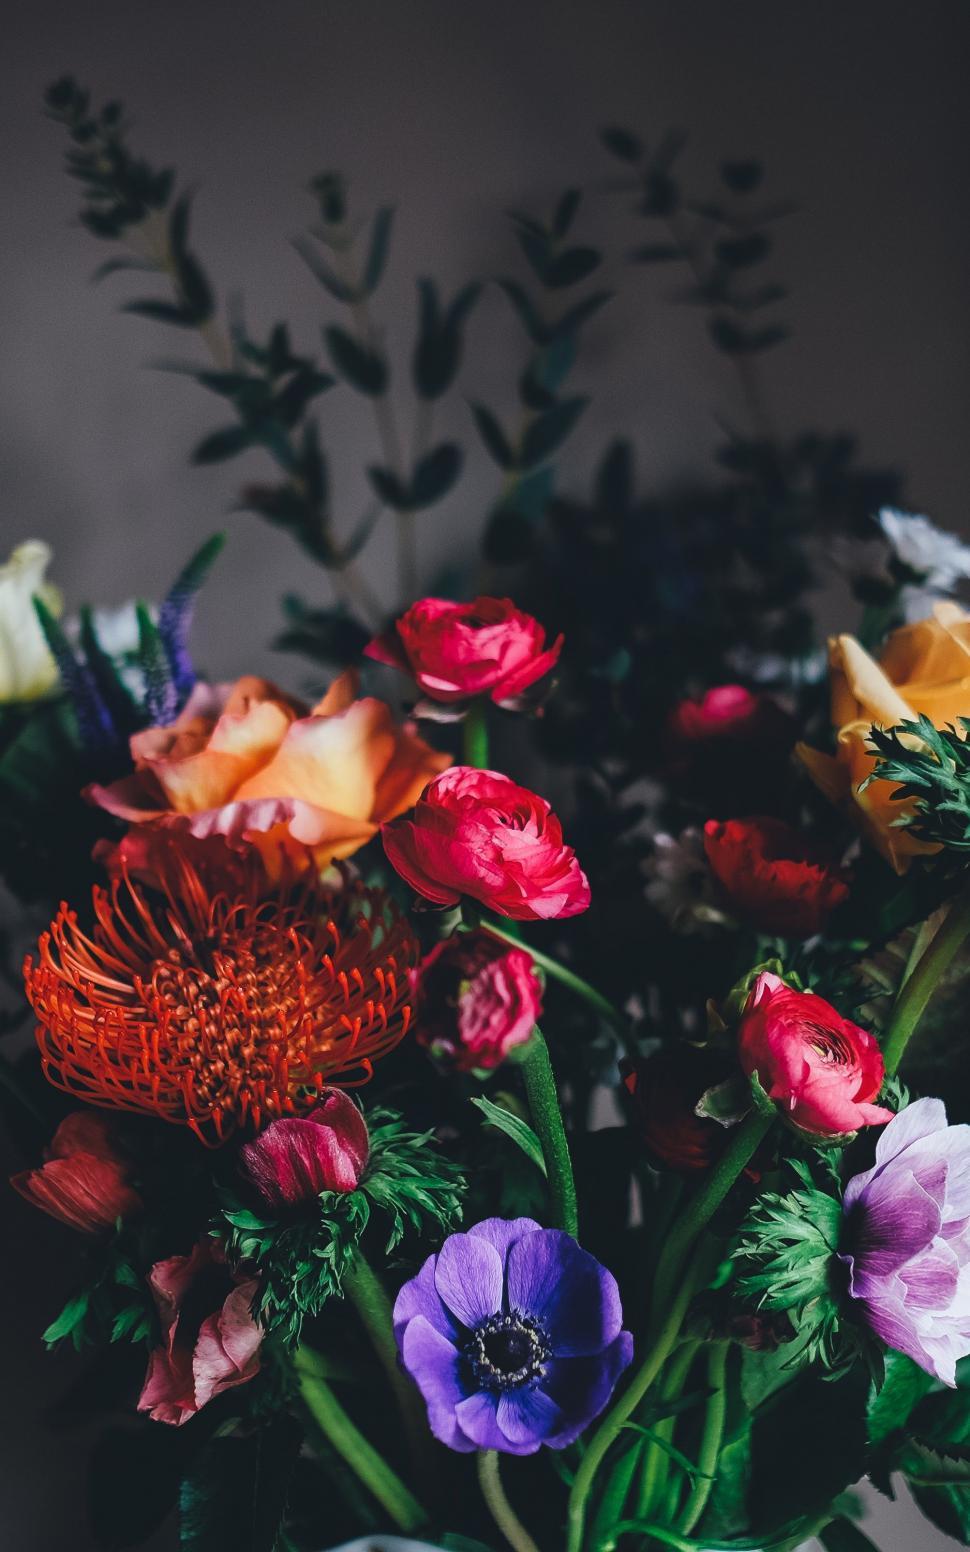 Free Image of Colorful Flowers in a Vase 